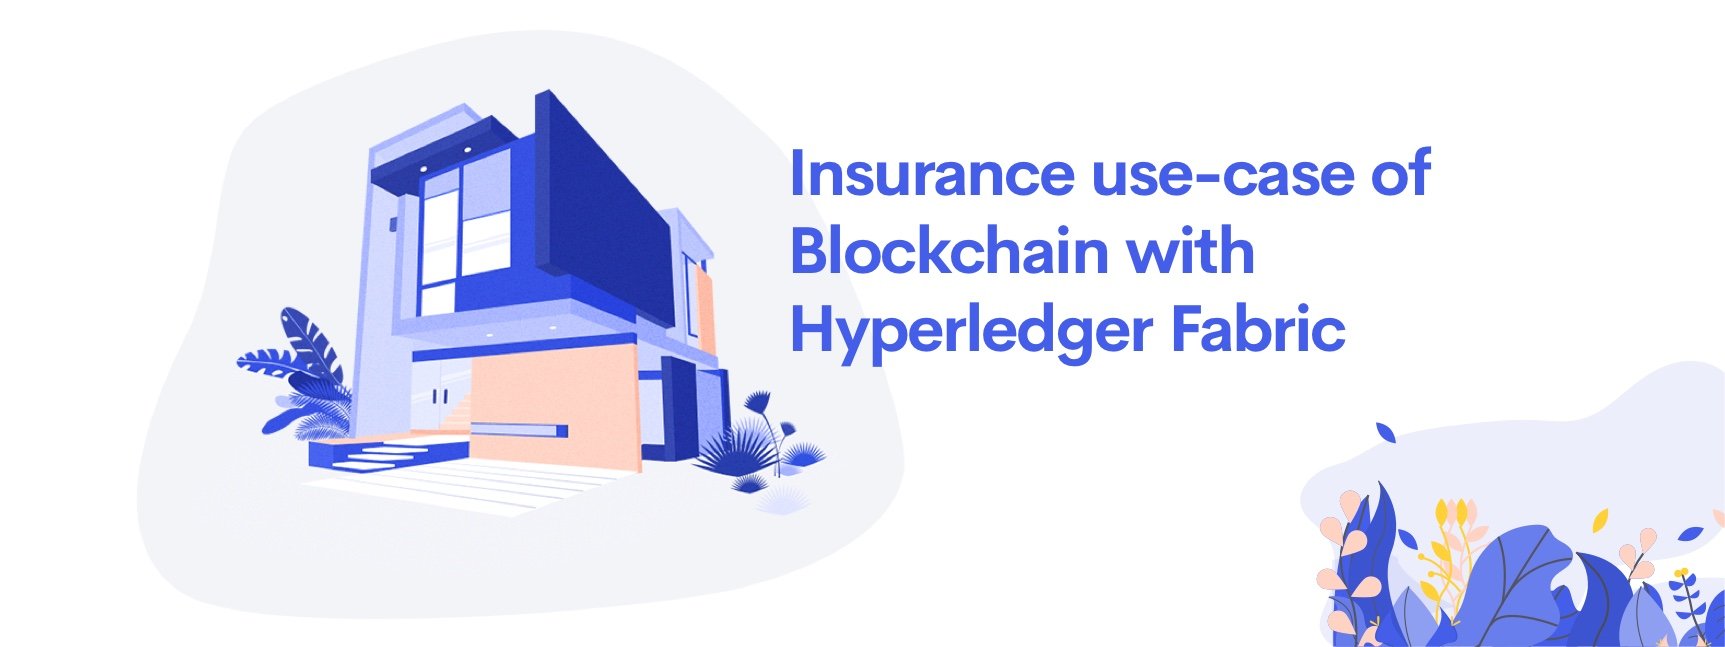 Redefining The Insurance Industry With Blockchain Using Hyperledger Fabric